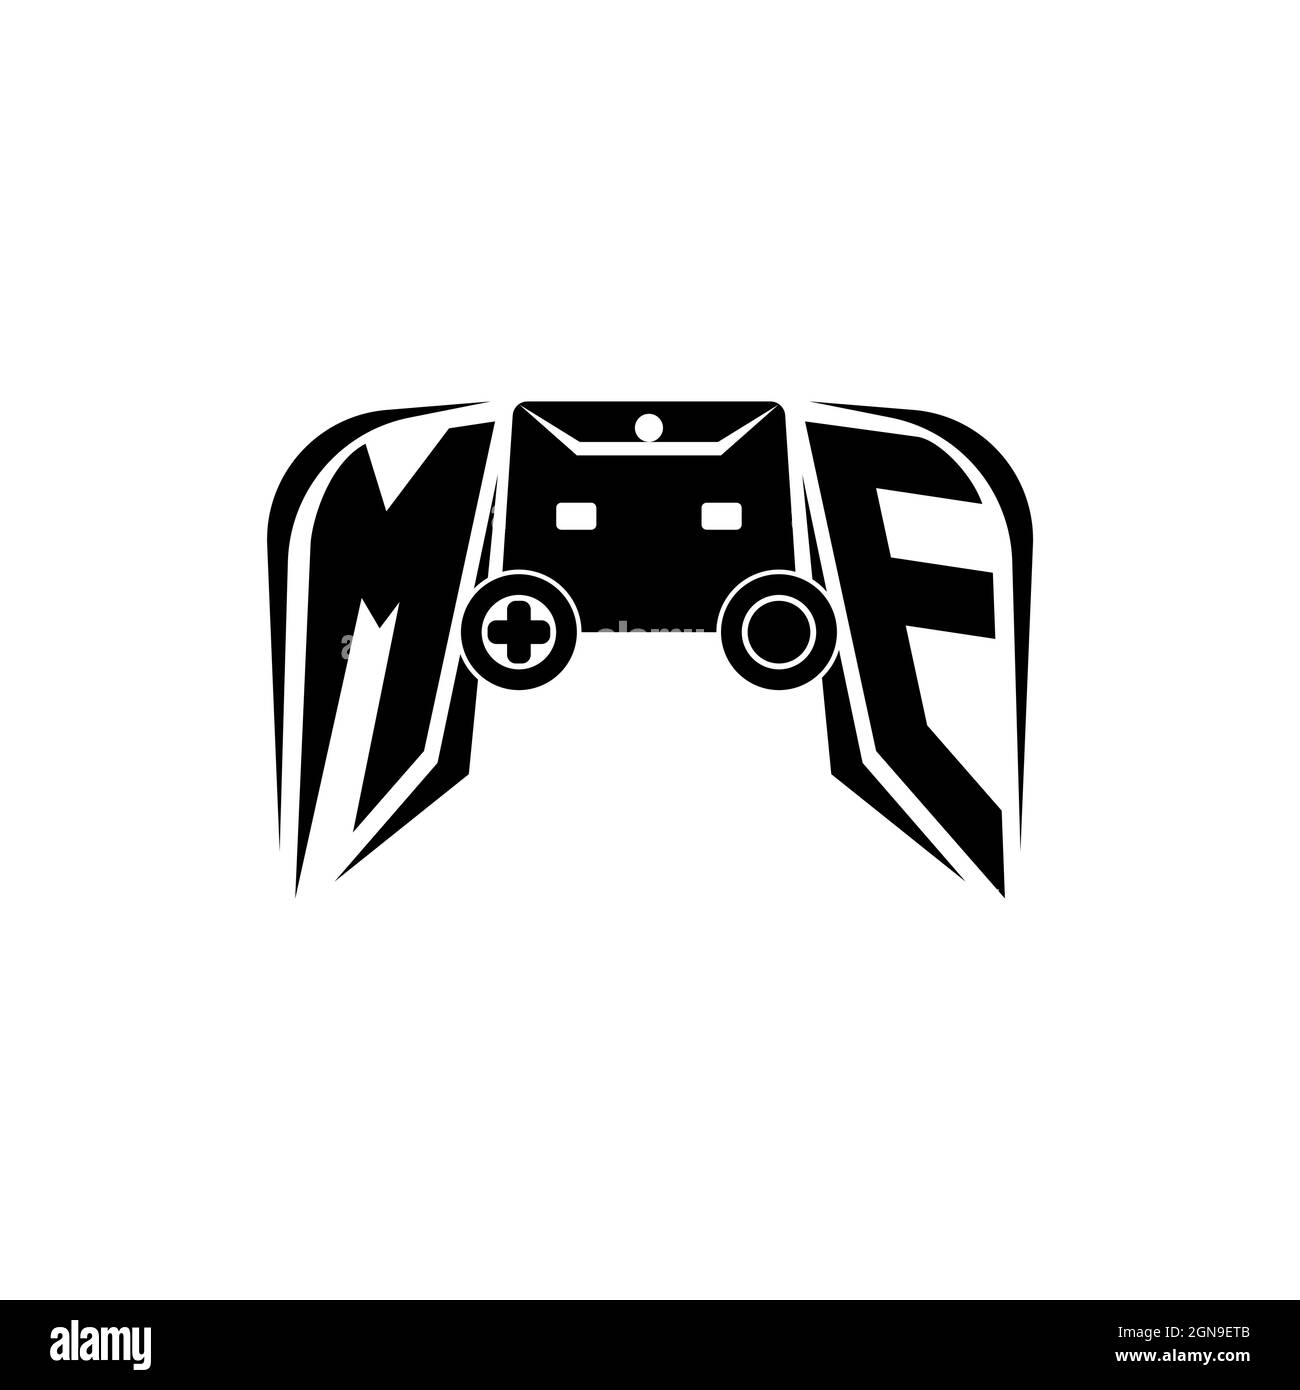 ME Initial ESport gaming logo. Game console shape style vector ...